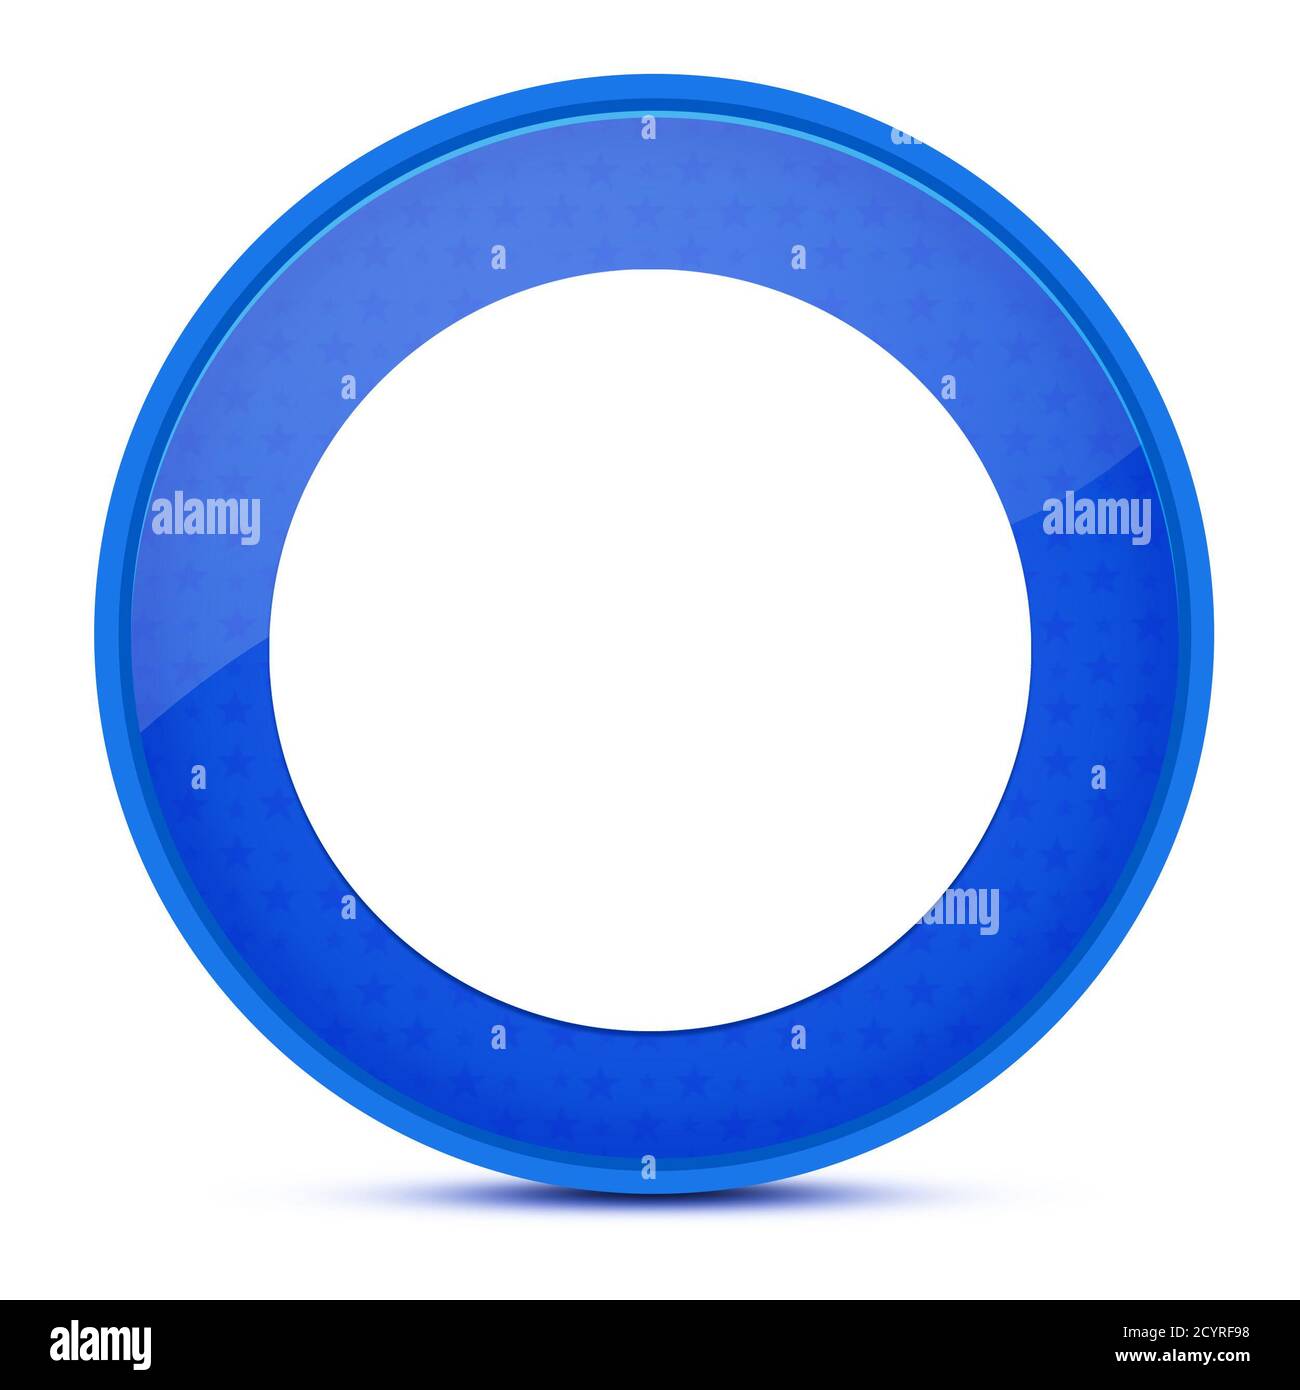 Record aesthetic glossy blue round button abstract illustration Stock ...